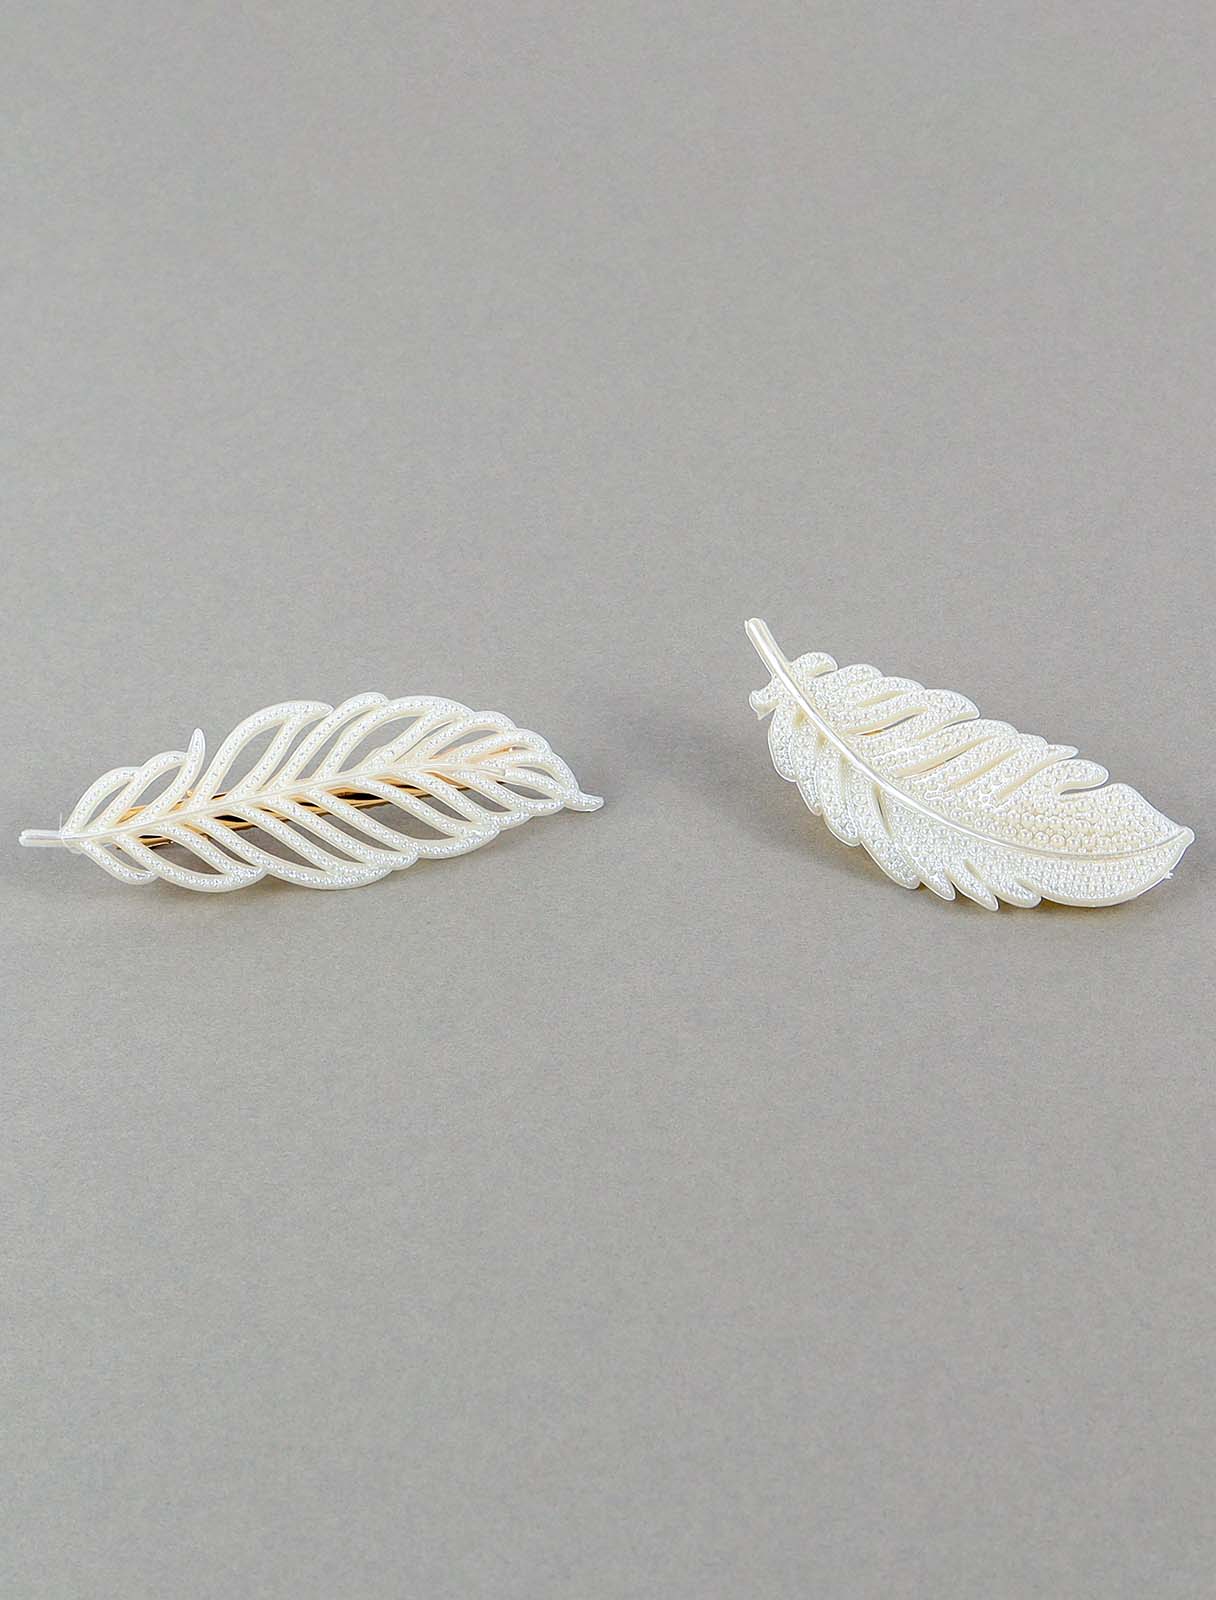 Hair clip in the form of a feather of pearls, 2 pieces